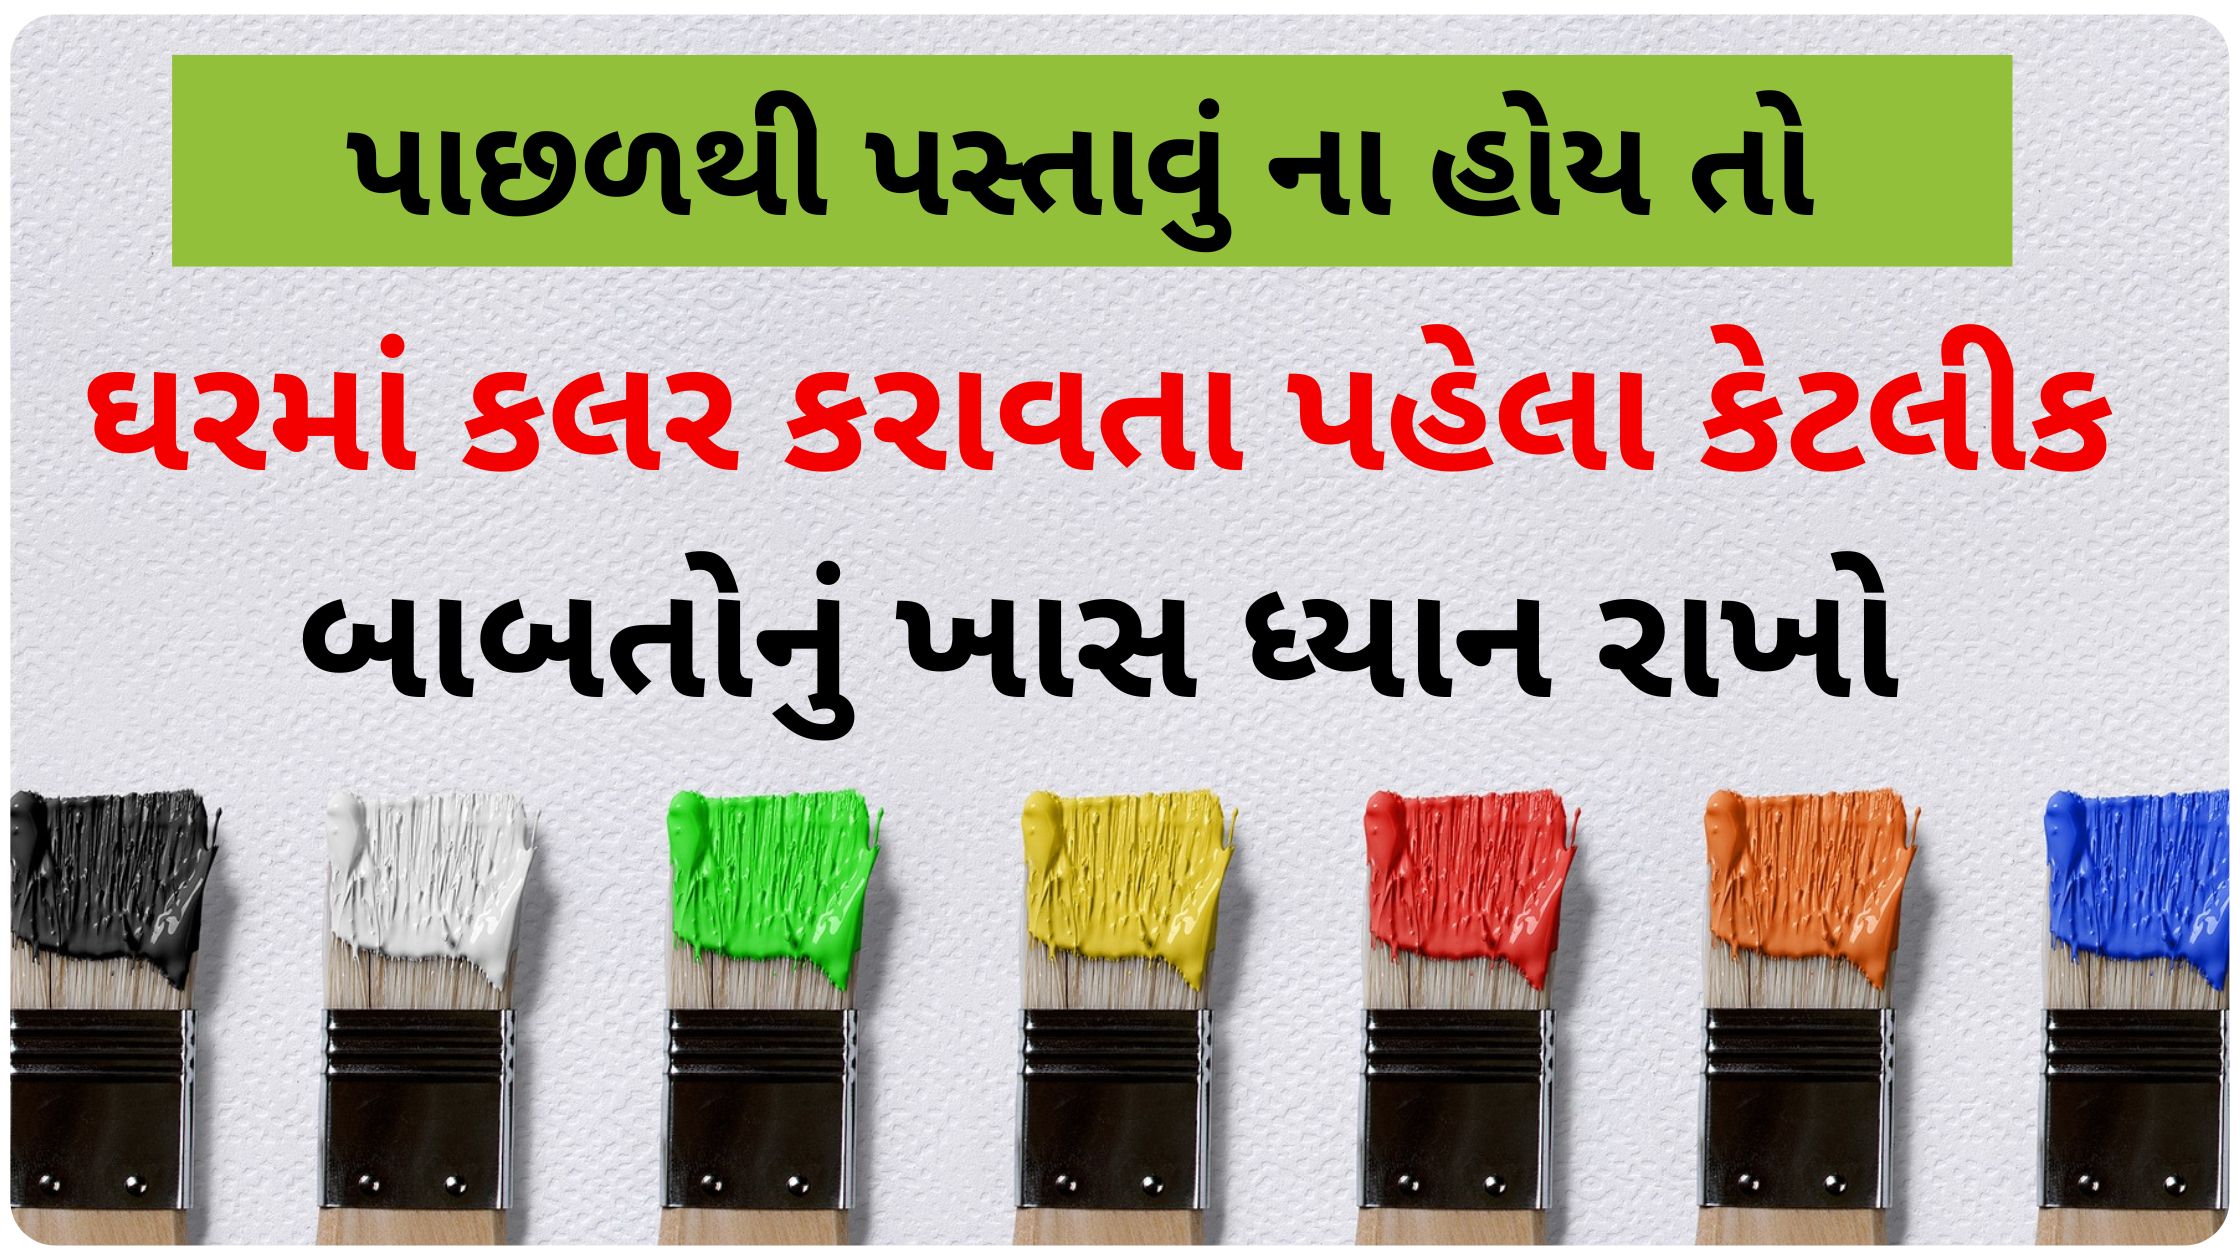 house painting tips in gujarati